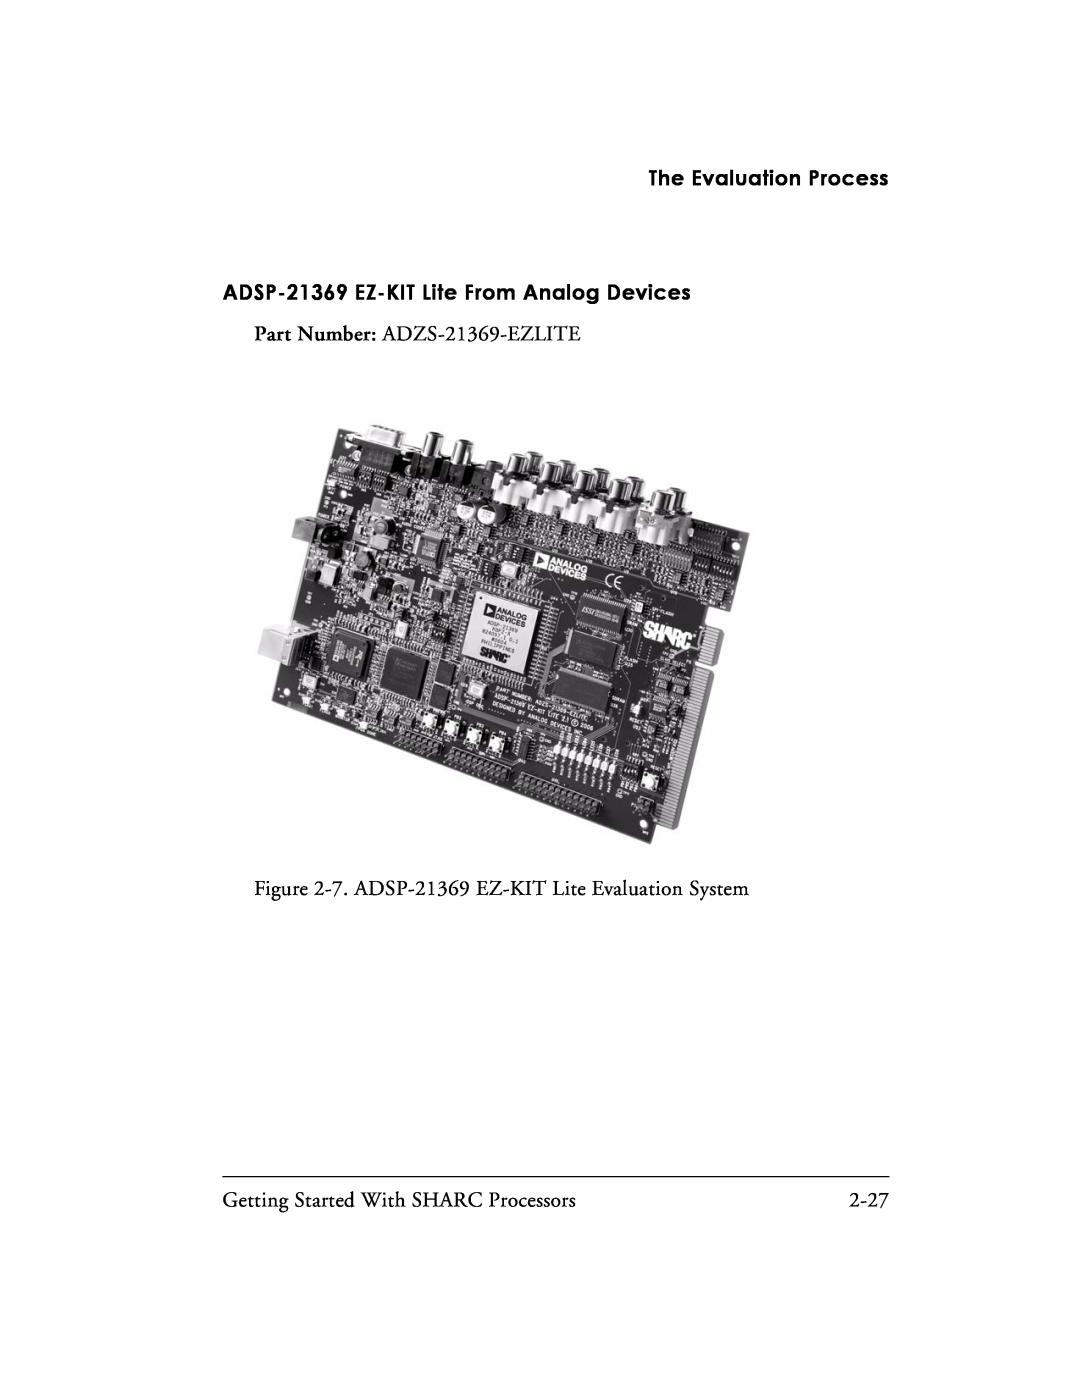 Analog Devices 82-003536-01 manual ADSP-21369 EZ-KITLite From Analog Devices, The Evaluation Process, 2-27 